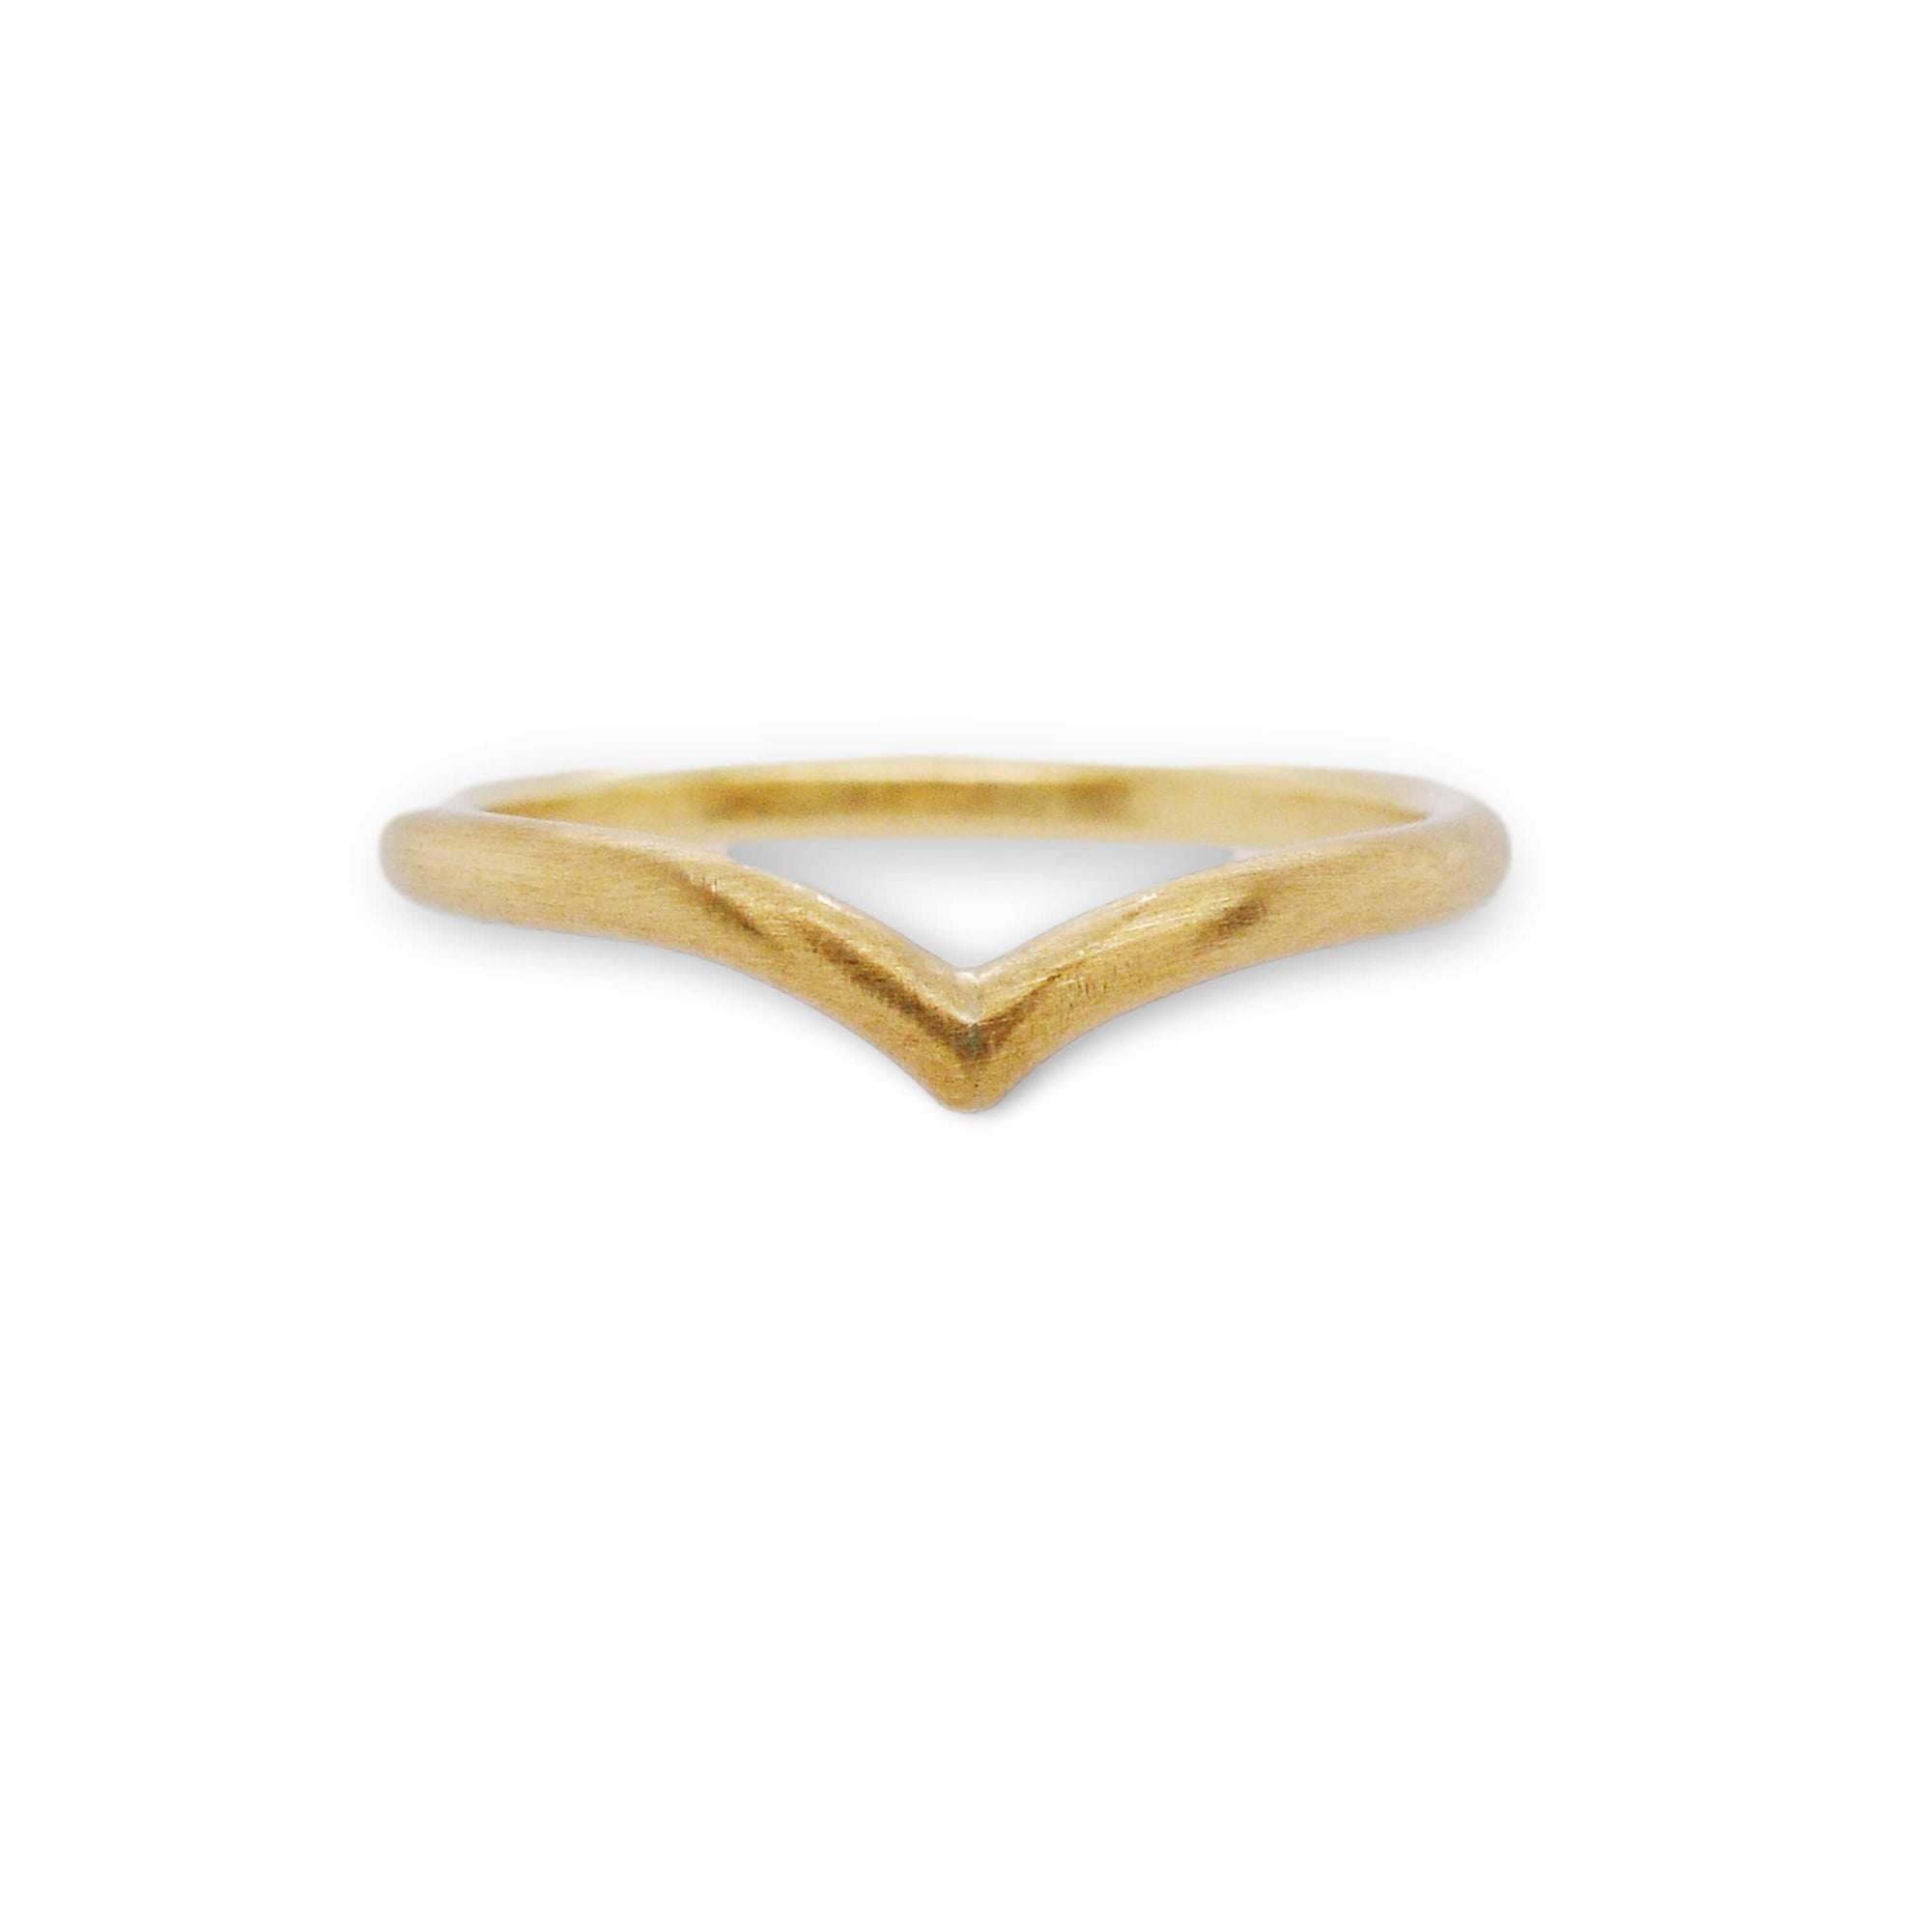 Yellow gold sharp contour band handmade with recycled metal. Made by EC Design Jewelry in Minneapolis, MN.